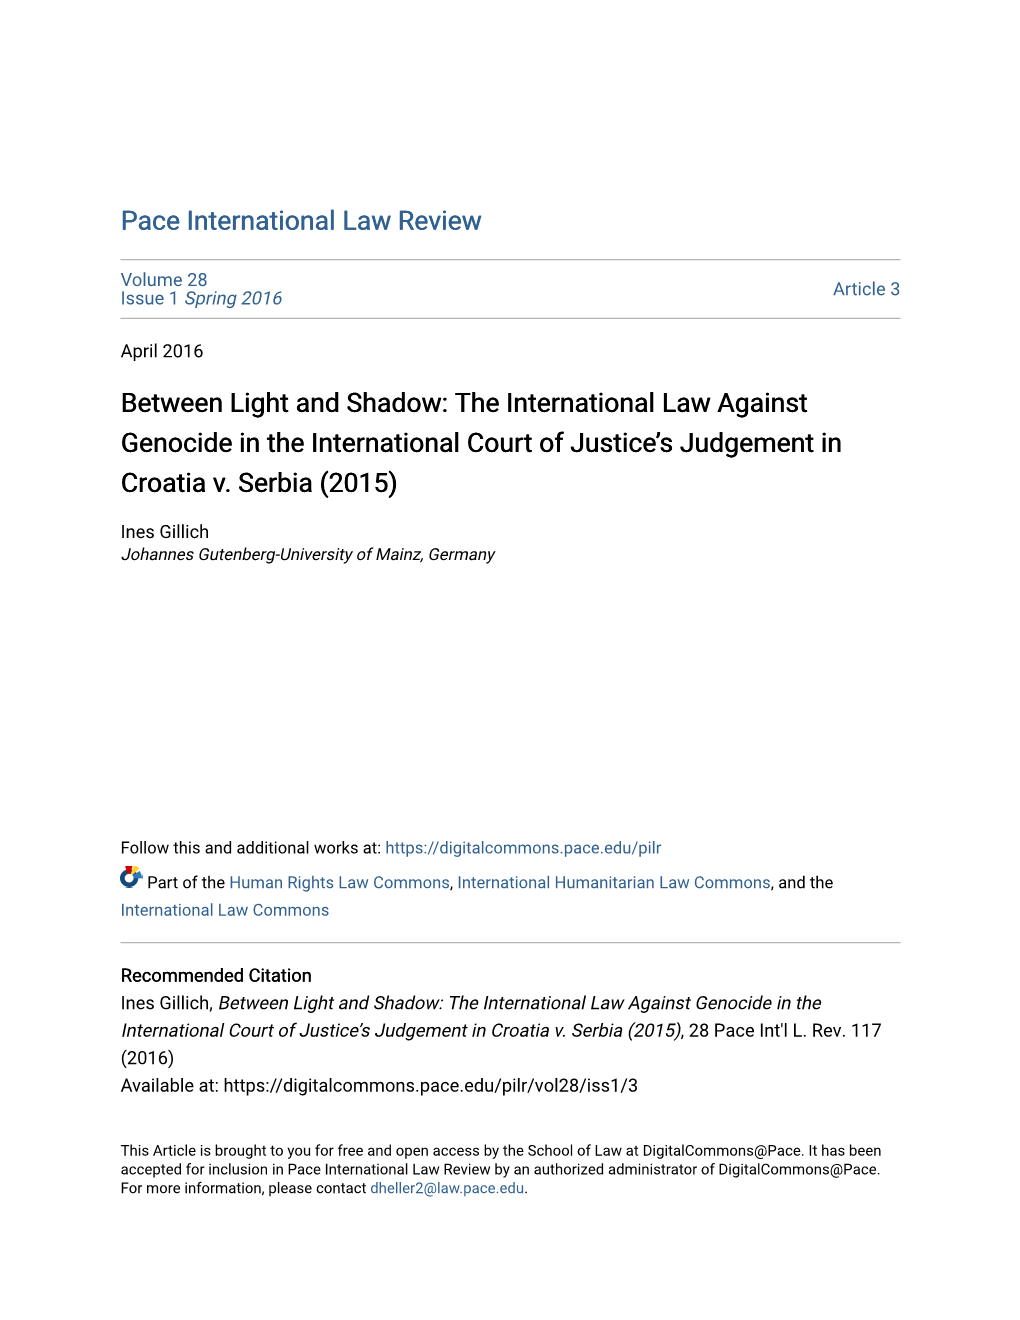 The International Law Against Genocide in the International Court of Justice's Judgement in Croatia